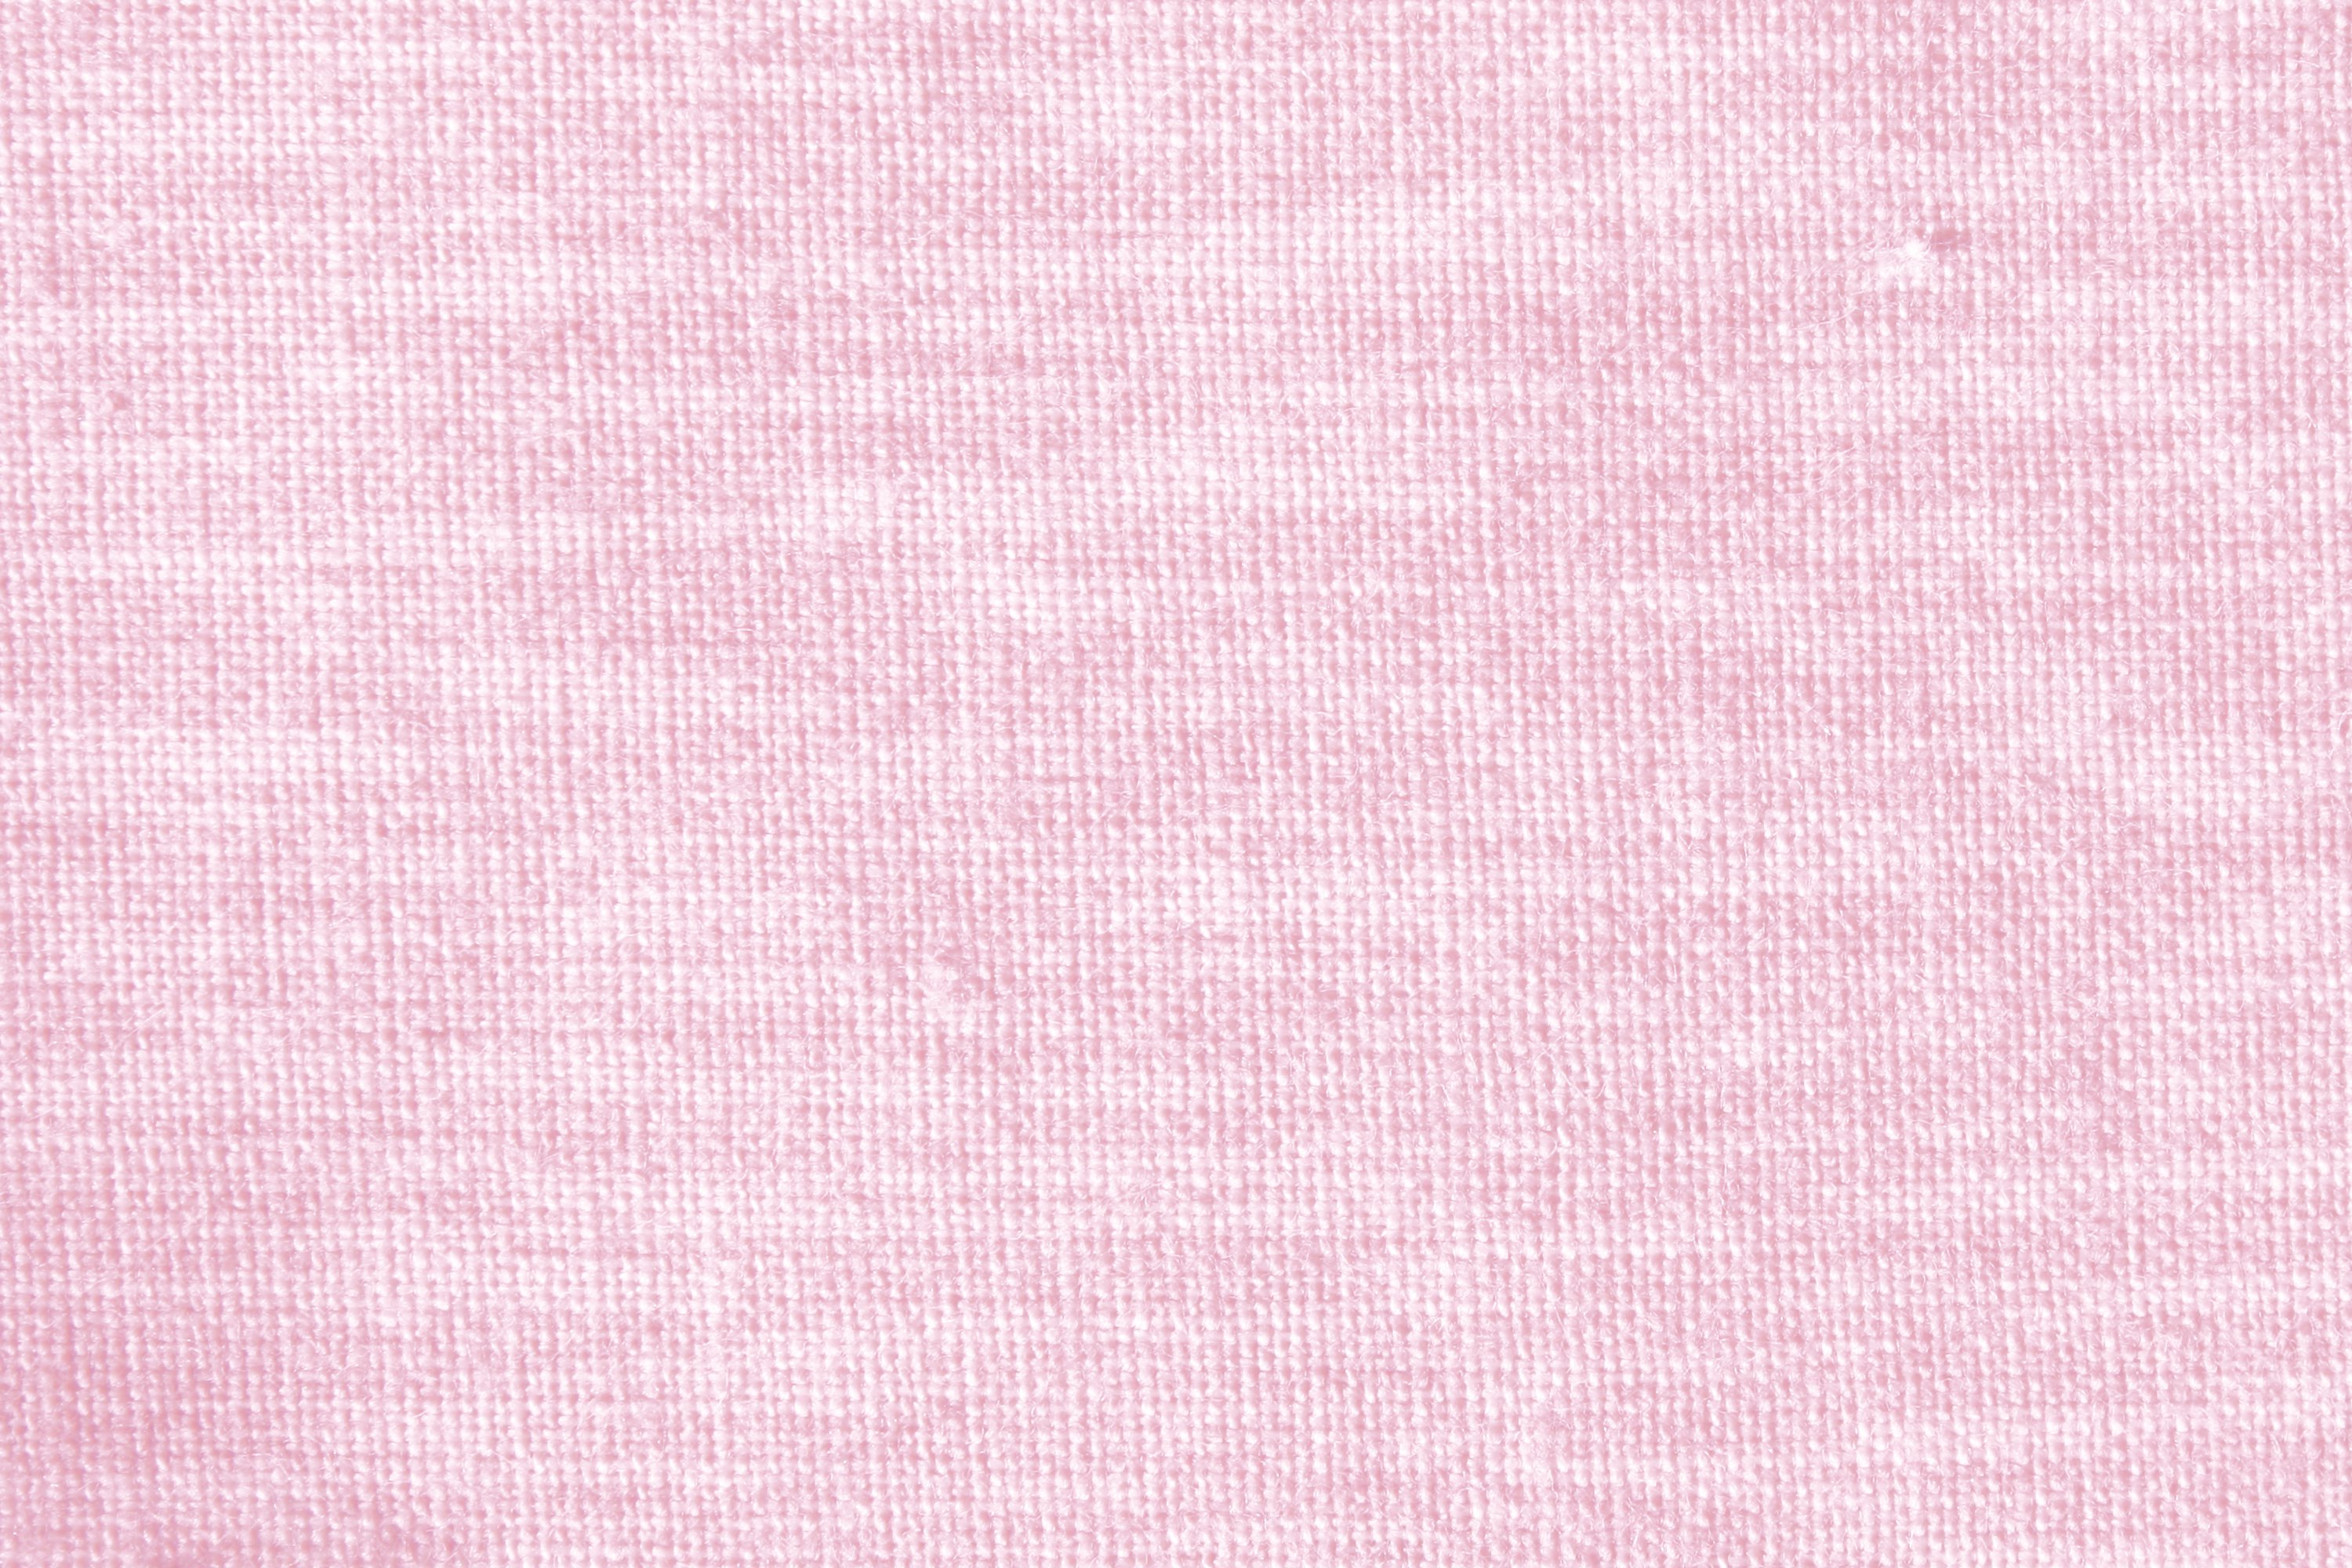 Pink Woven Fabric Close Up Texture Picture | Free Photograph ...